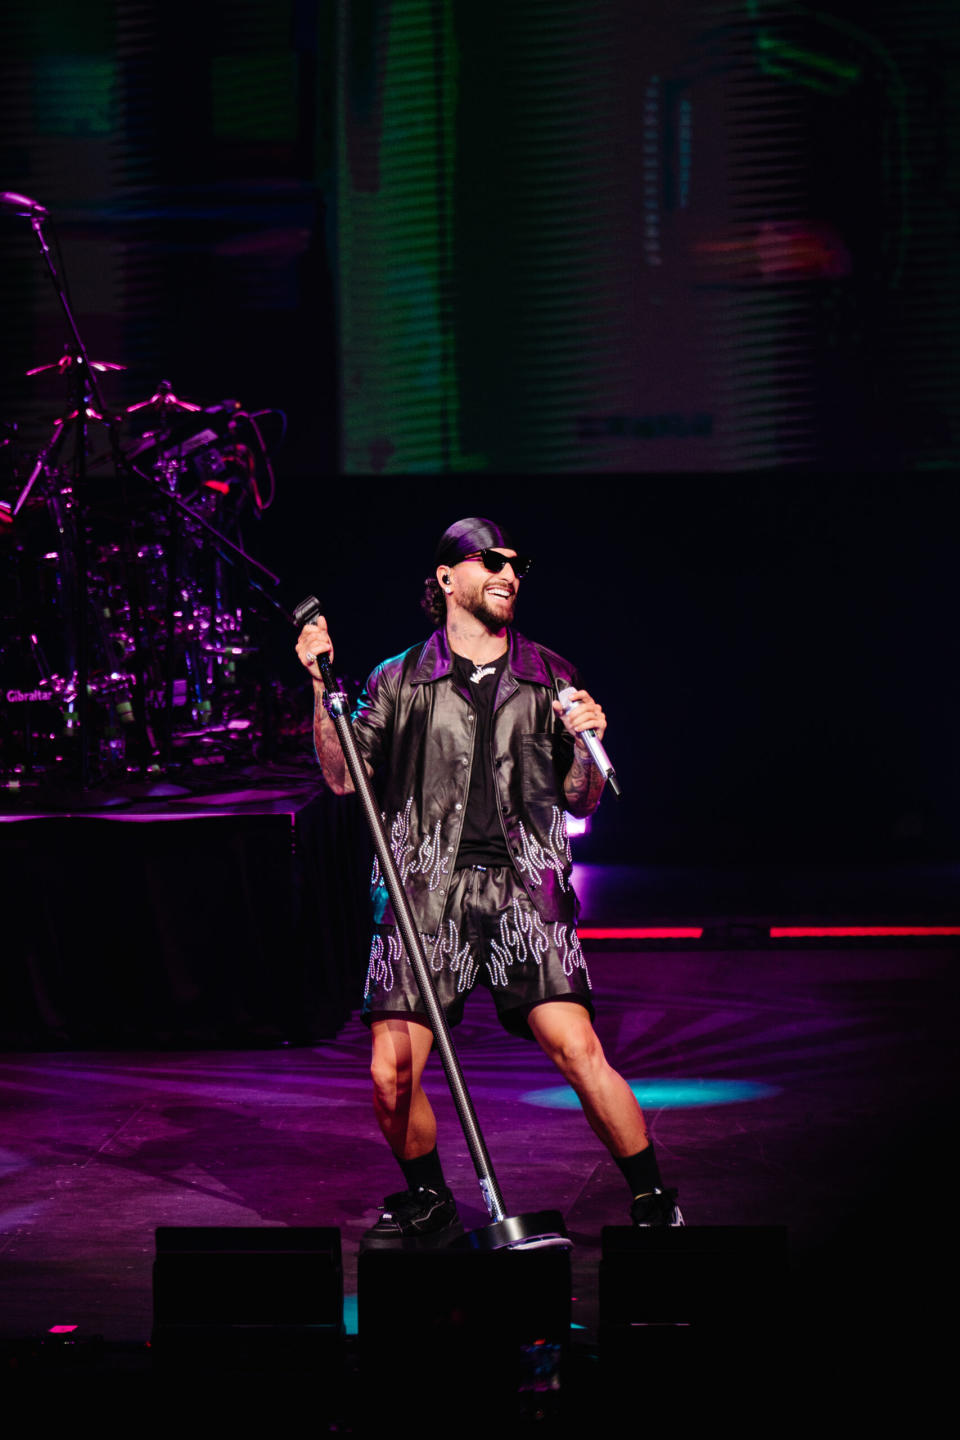 Global superstar Maluma performs to a sold-out crowd at the Yaamava’ Theater on April 27 opening with his hit songs like “Hawái” and “Madrid” before addressing the audience. Photo: 226 Collective